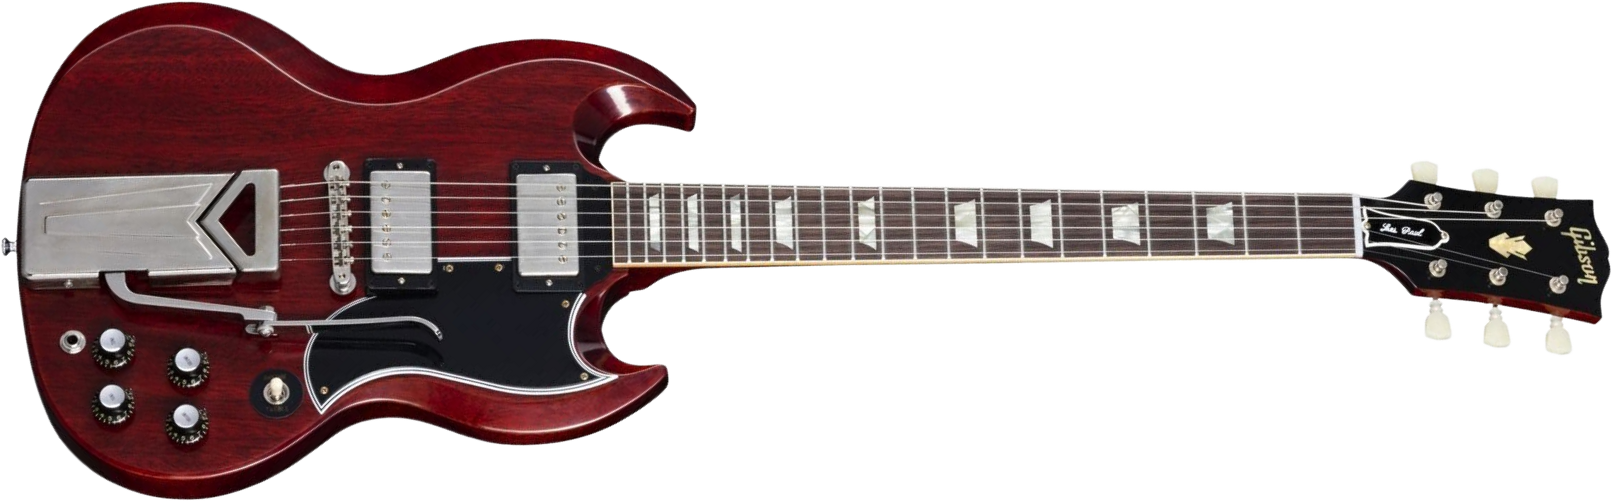 Gibson Sg Les Paul 1961 60th Ann. 2h Trem Rw - Vos Cherry Red - Double cut electric guitar - Main picture